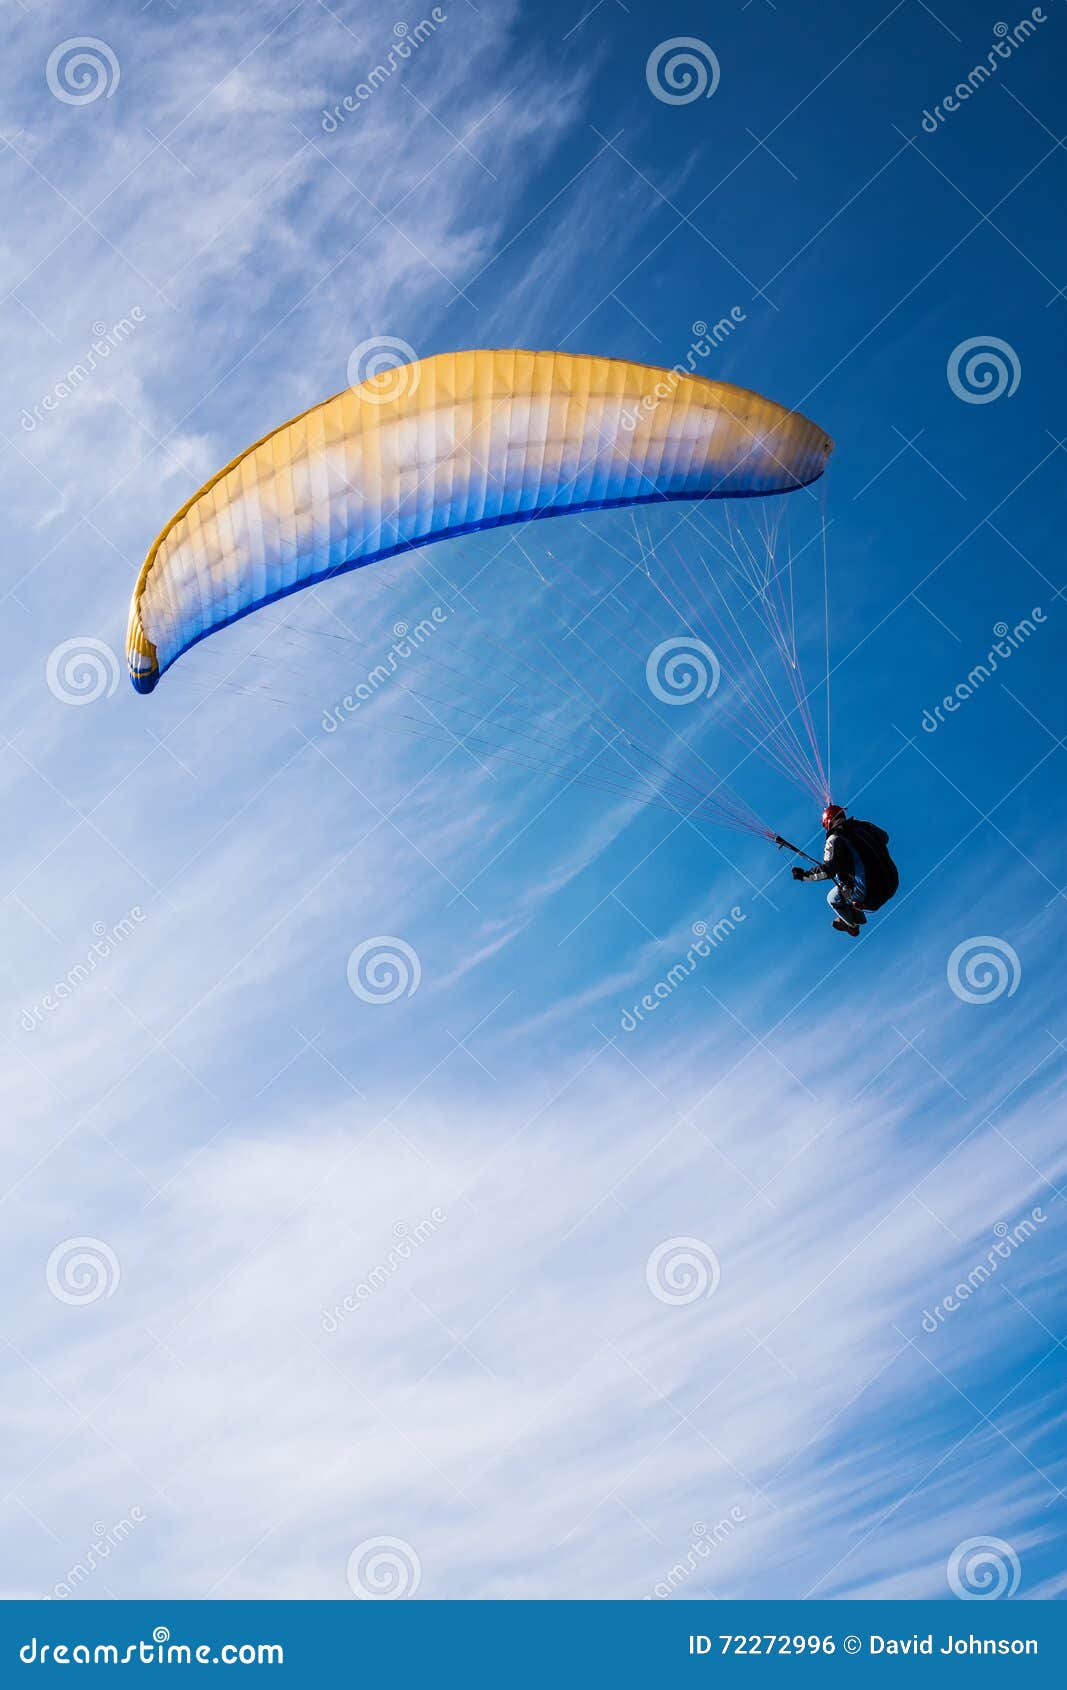 man flying yellow and blue parasail